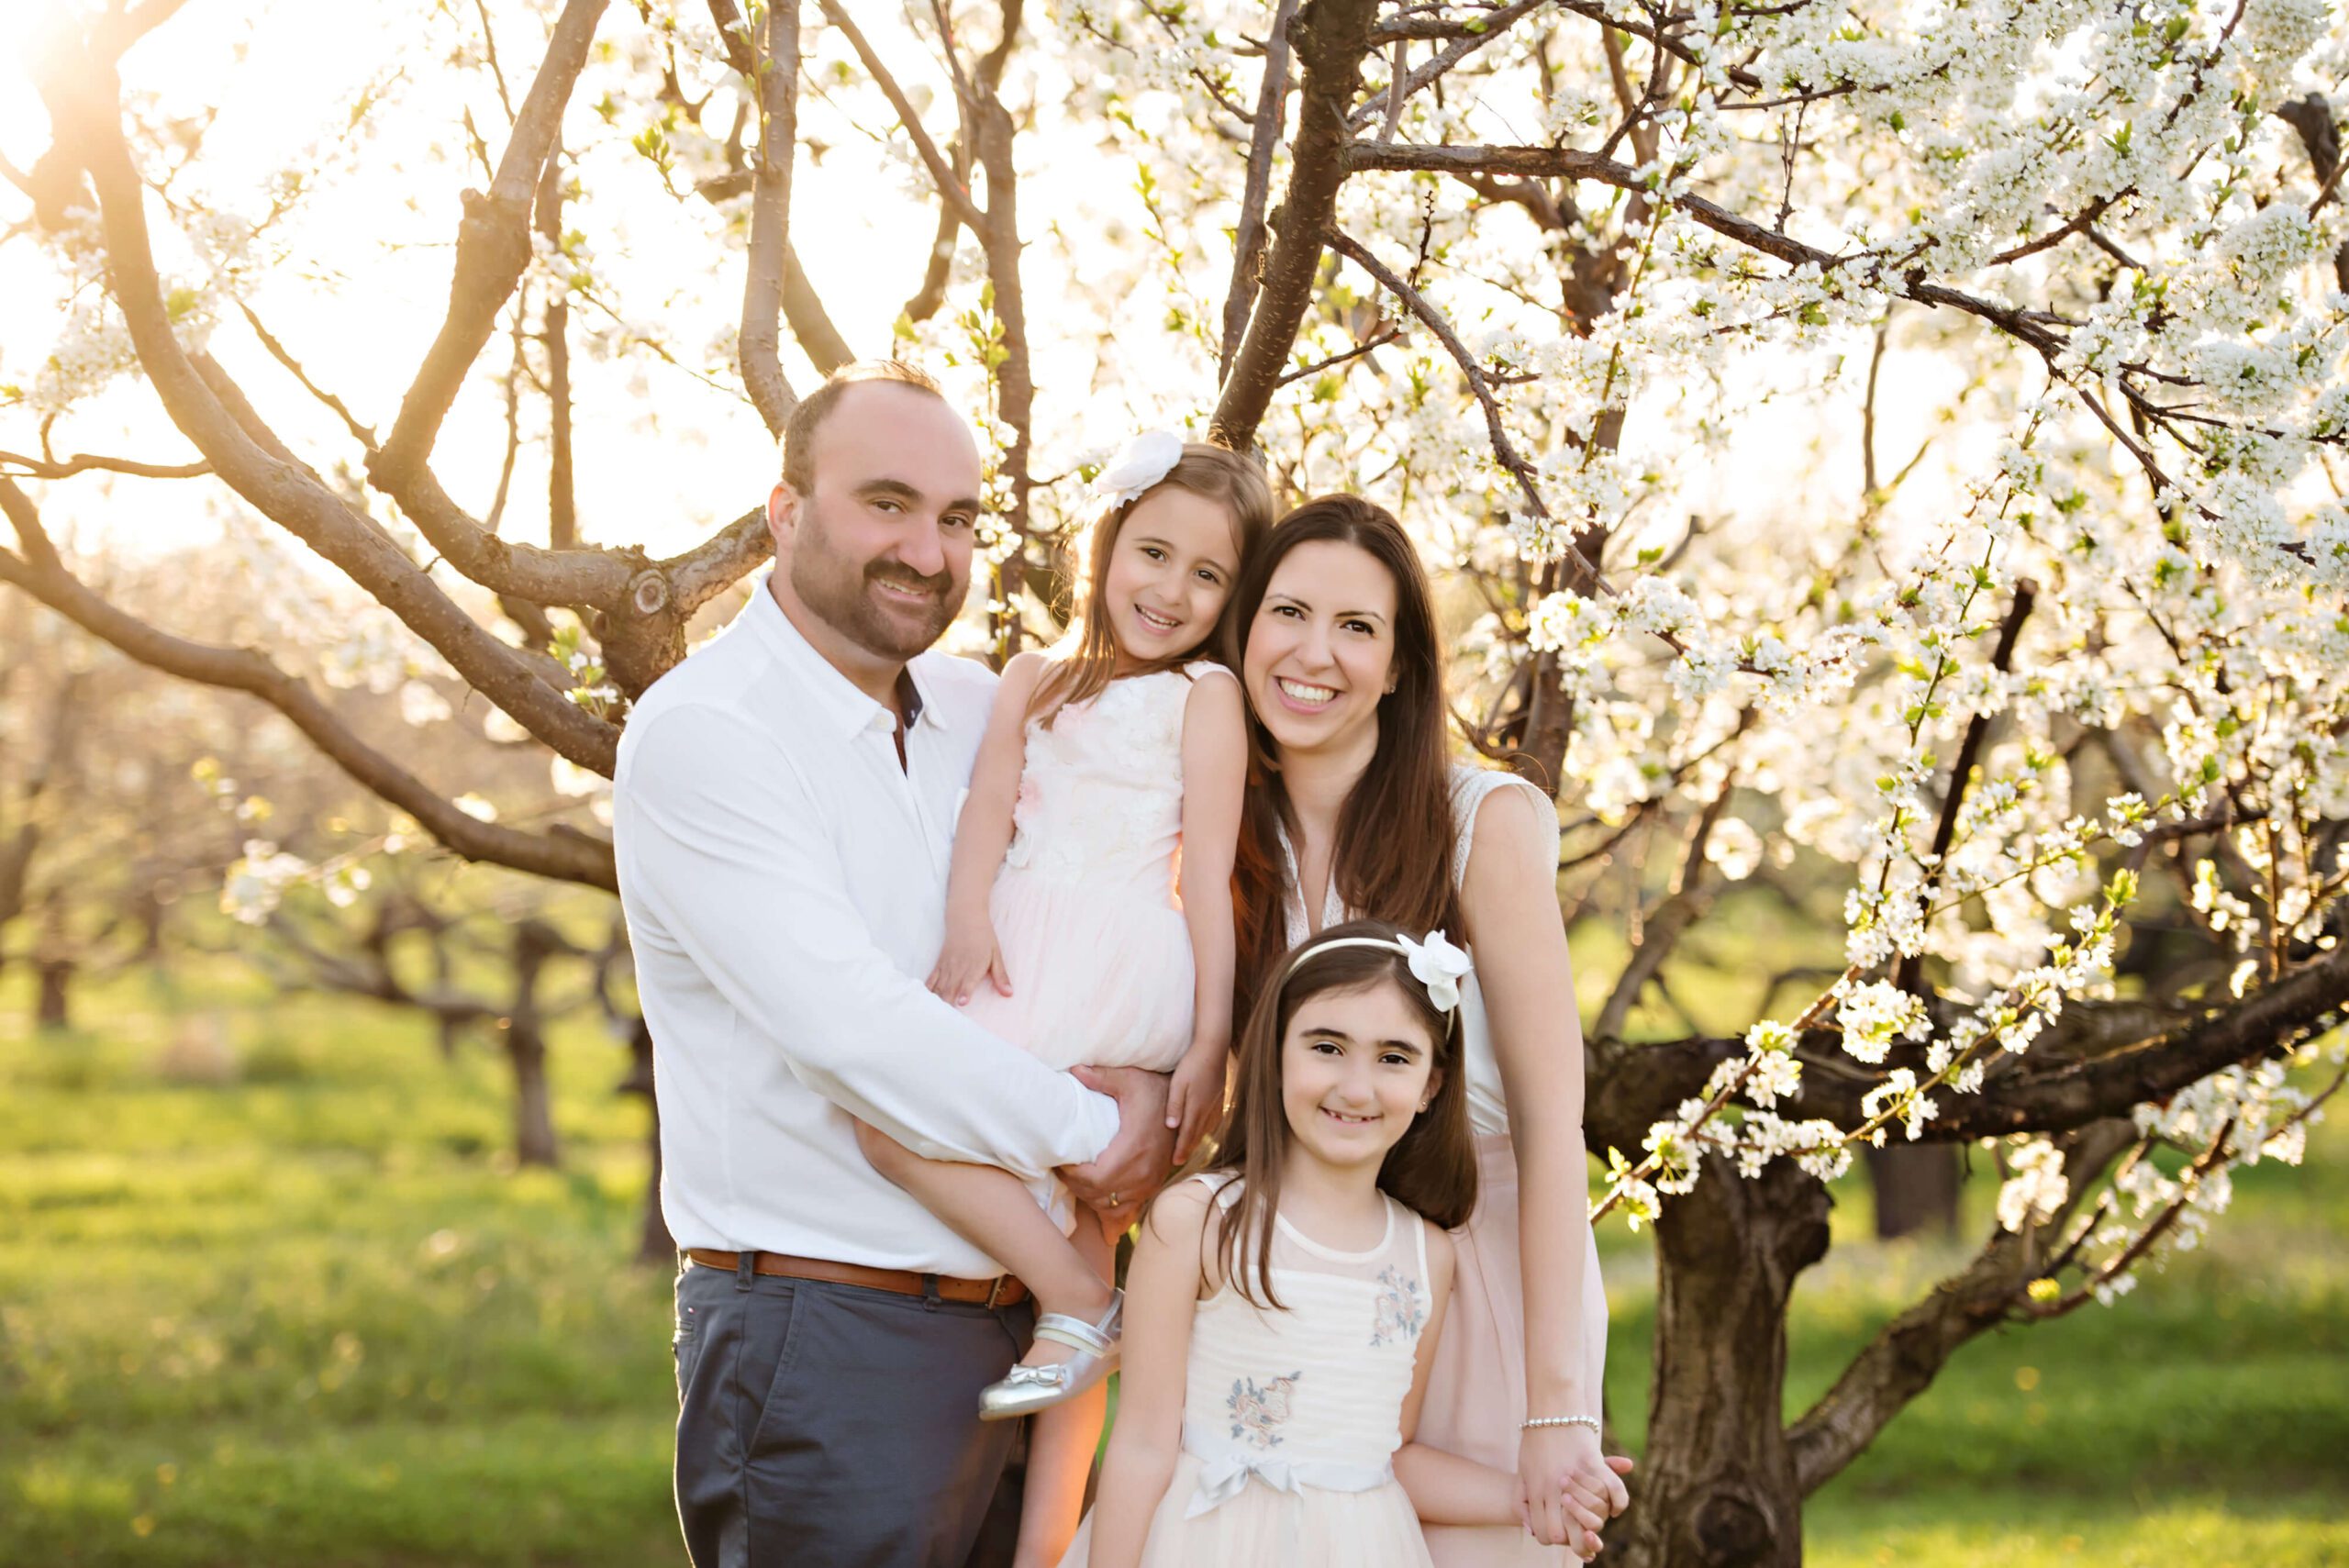 Beautiful family photos at the white cherry blossom trees